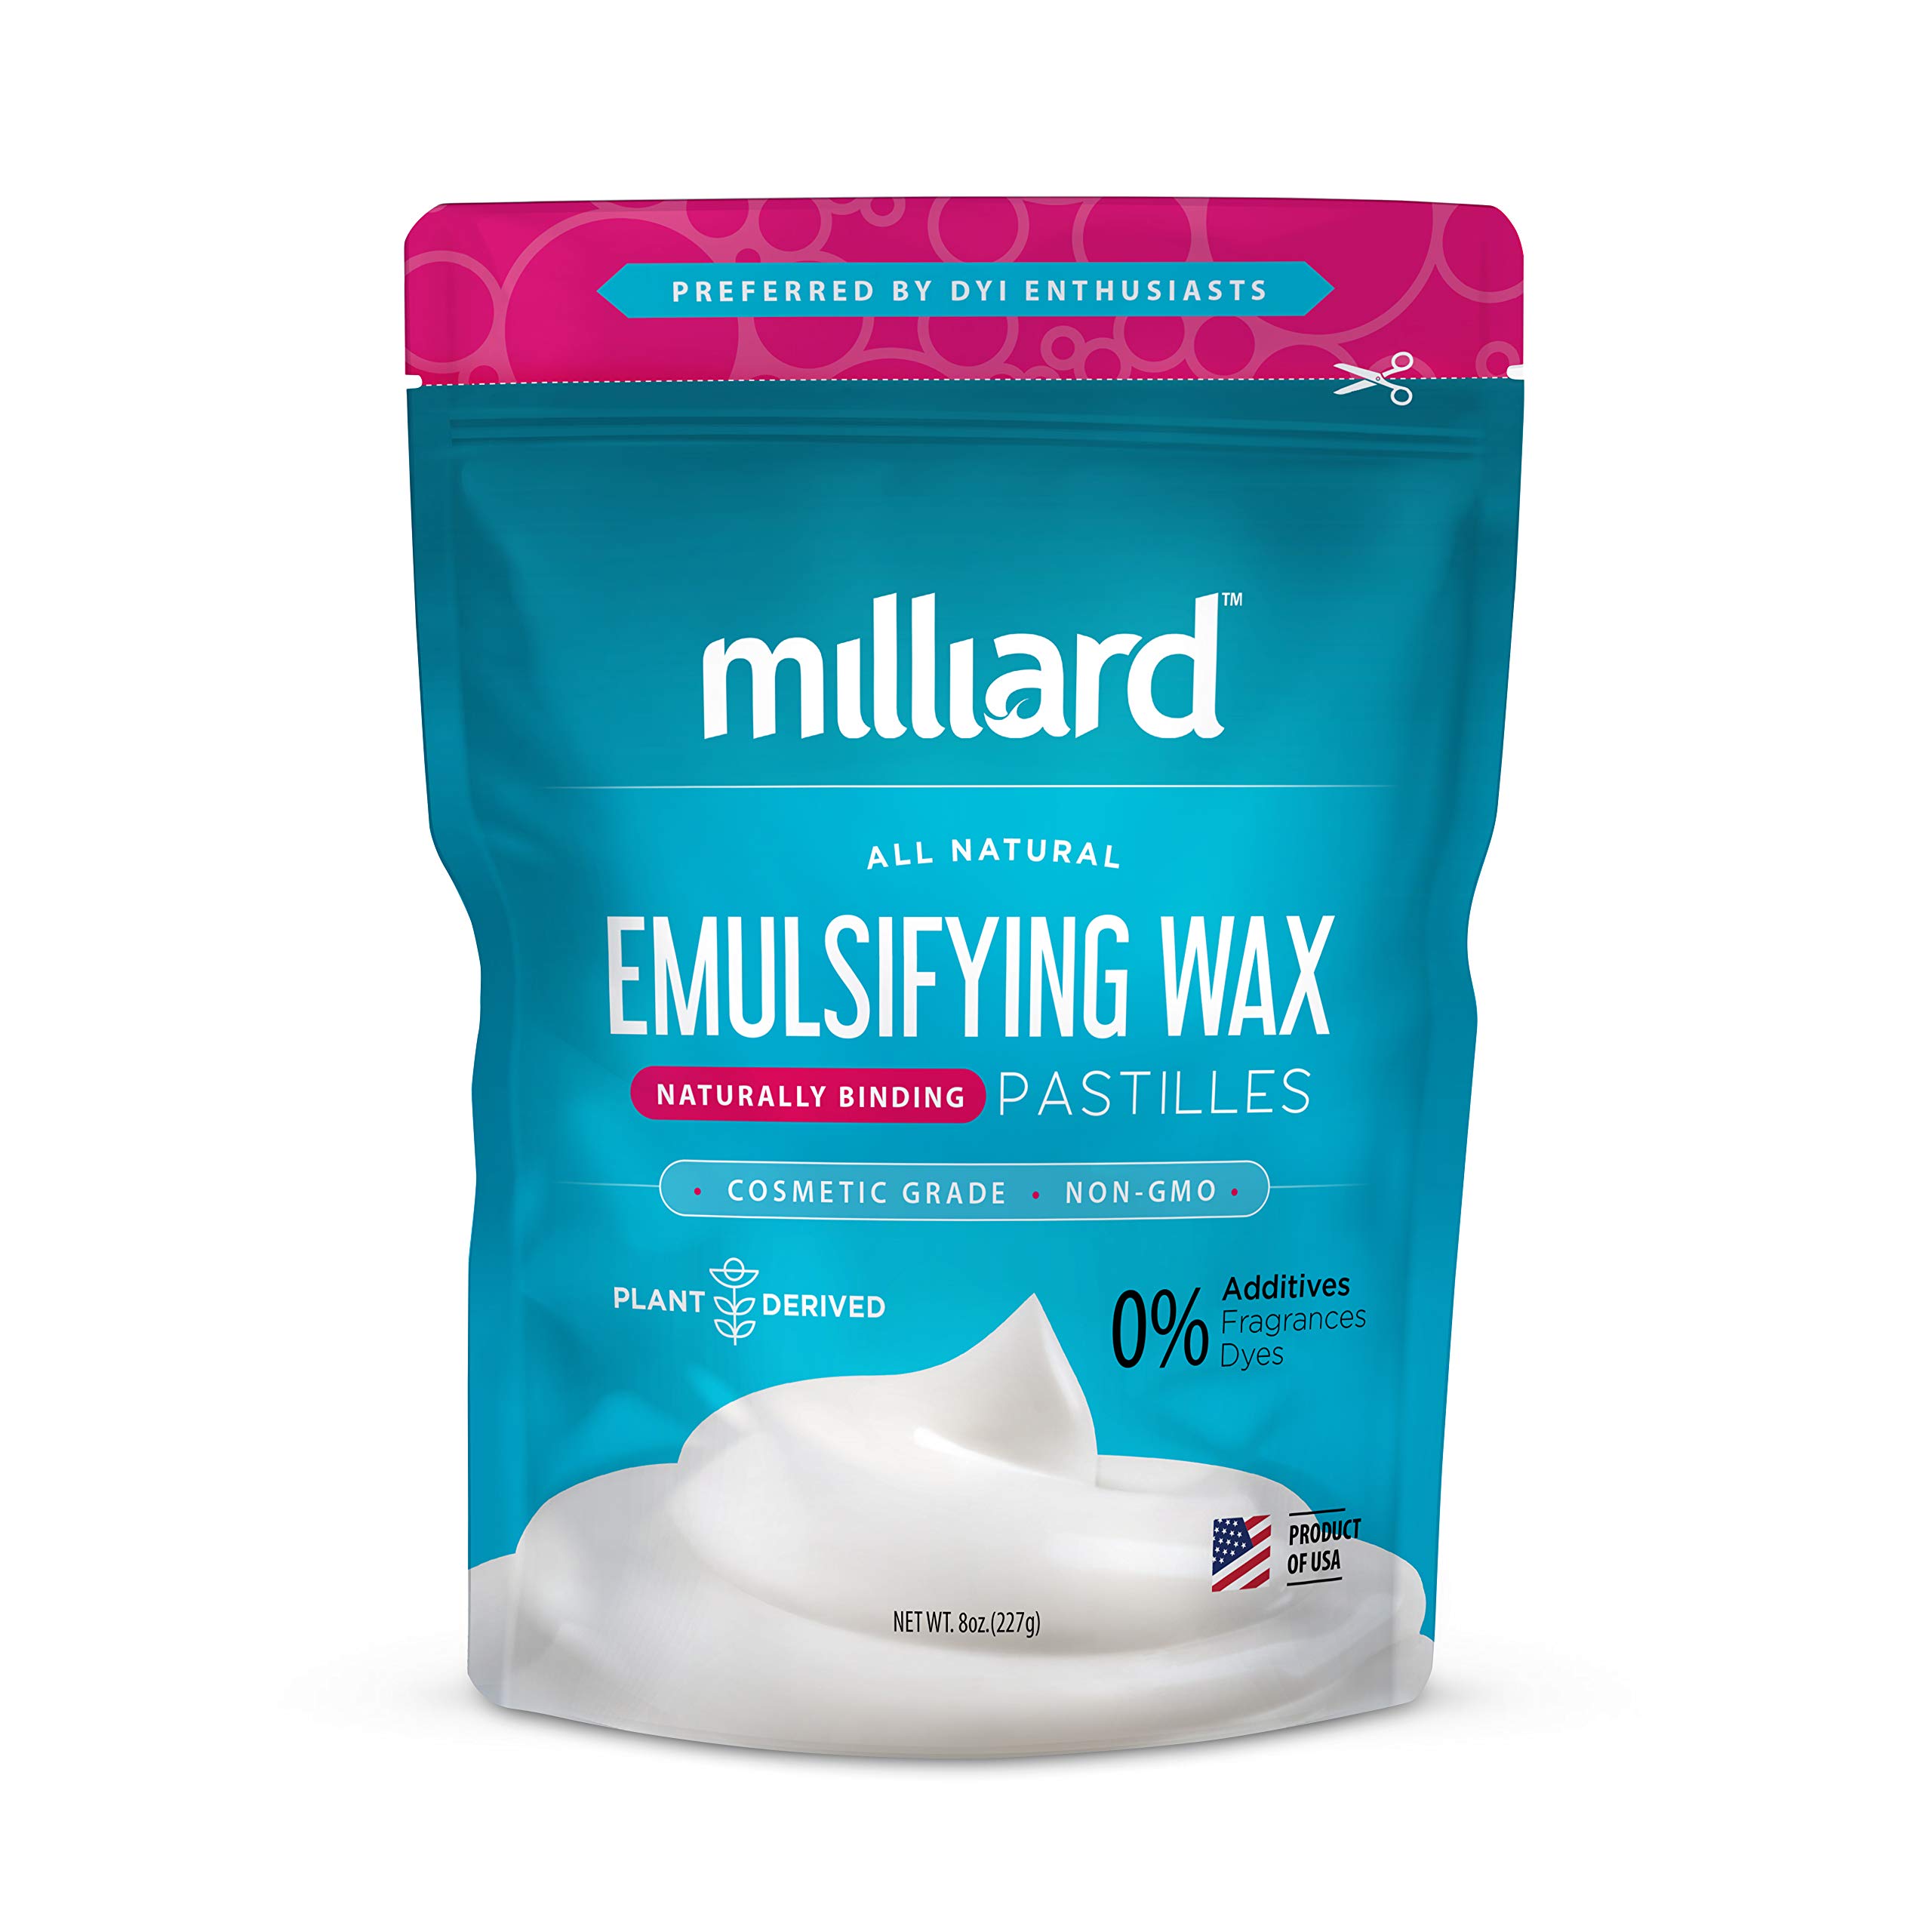 Milliard Product Name NON-GMO Emulsifying Wax Pastilles NF (8 oz.)